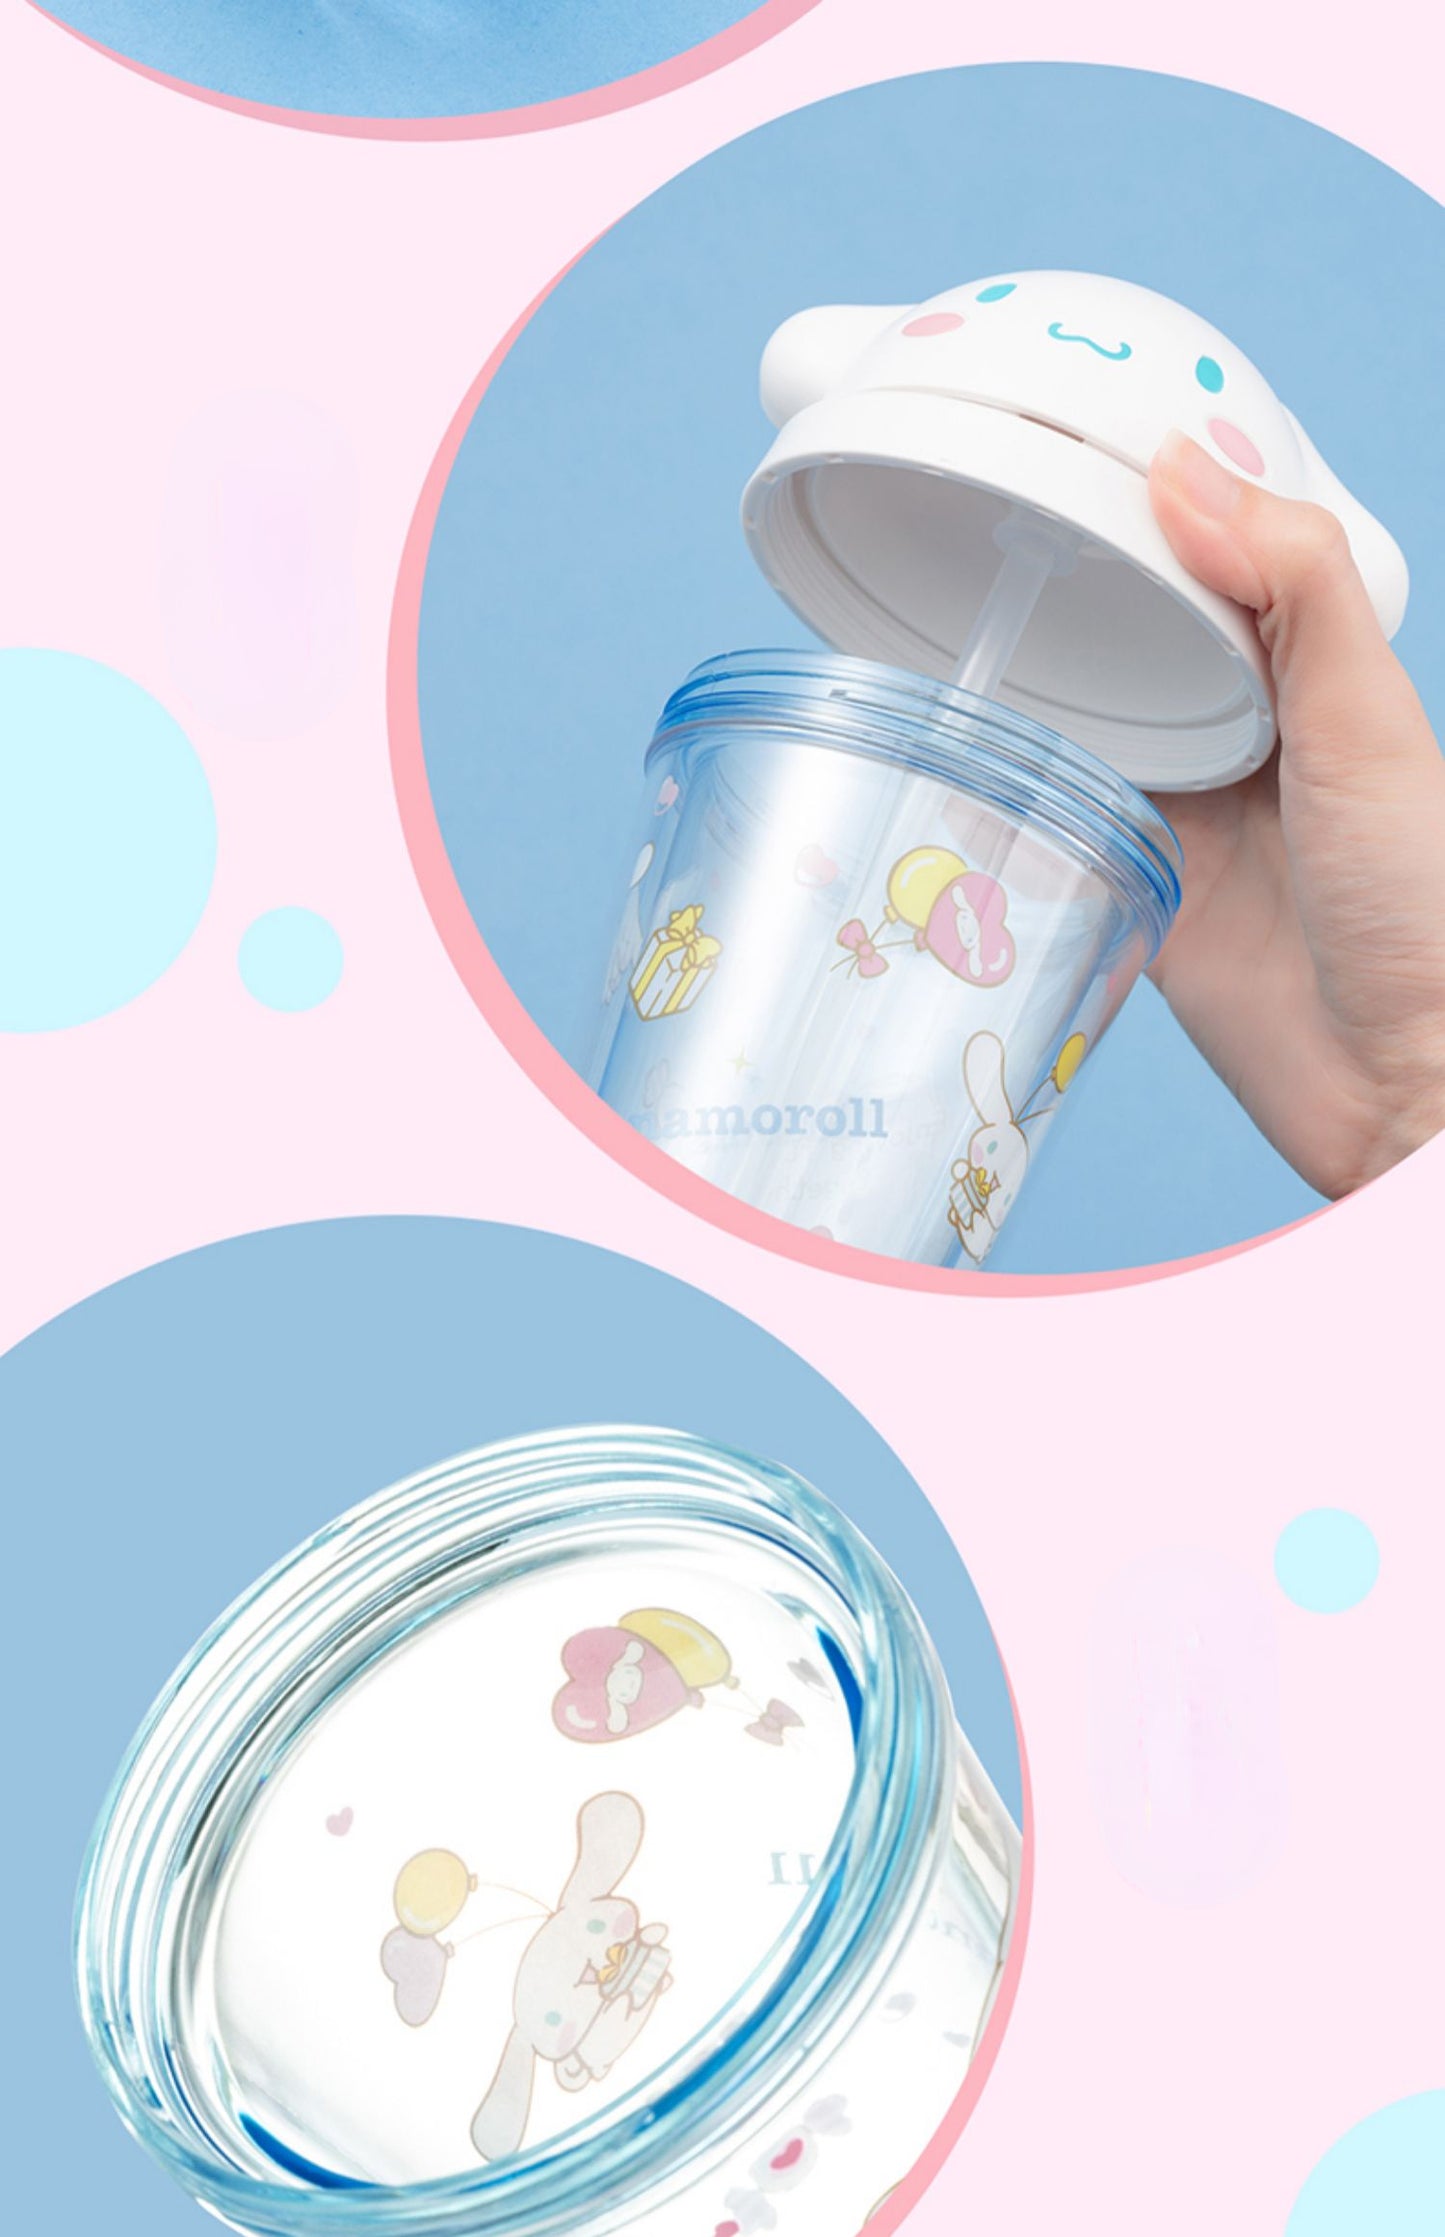 Sanrio x Miniso - Pattern Tumbler With Straw & Character Cap